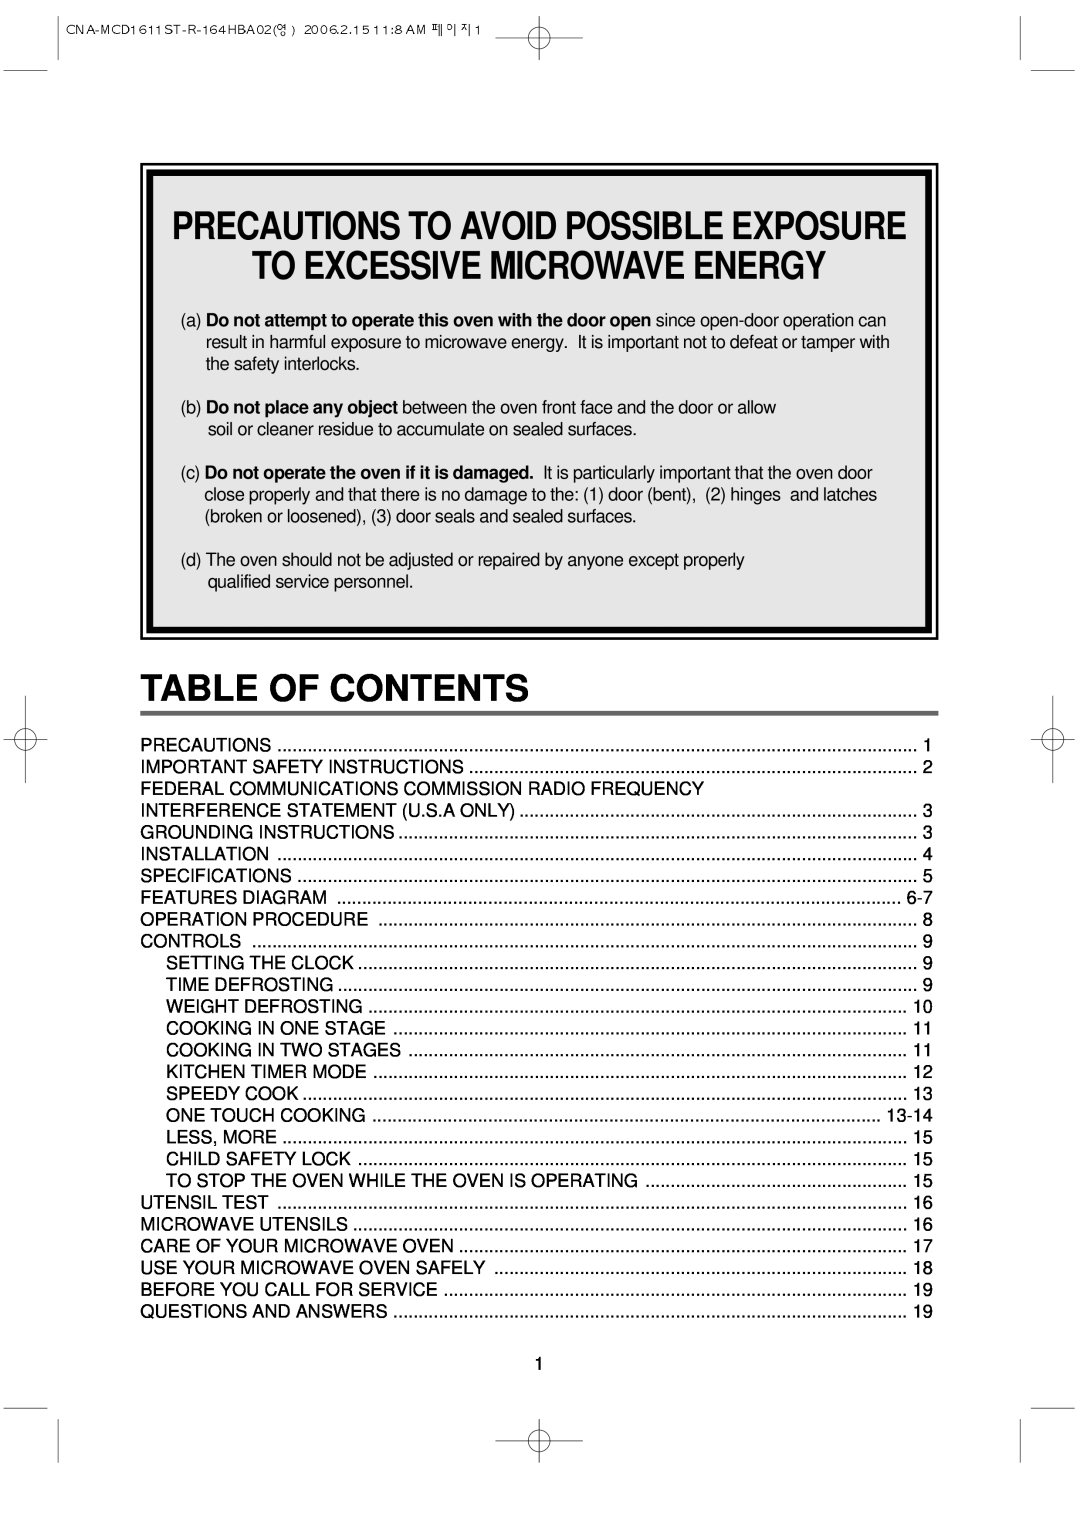 Magic Chef MCD1611ST manual Precautions To Avoid Possible Exposure, To Excessive Microwave Energy, Table Of Contents 